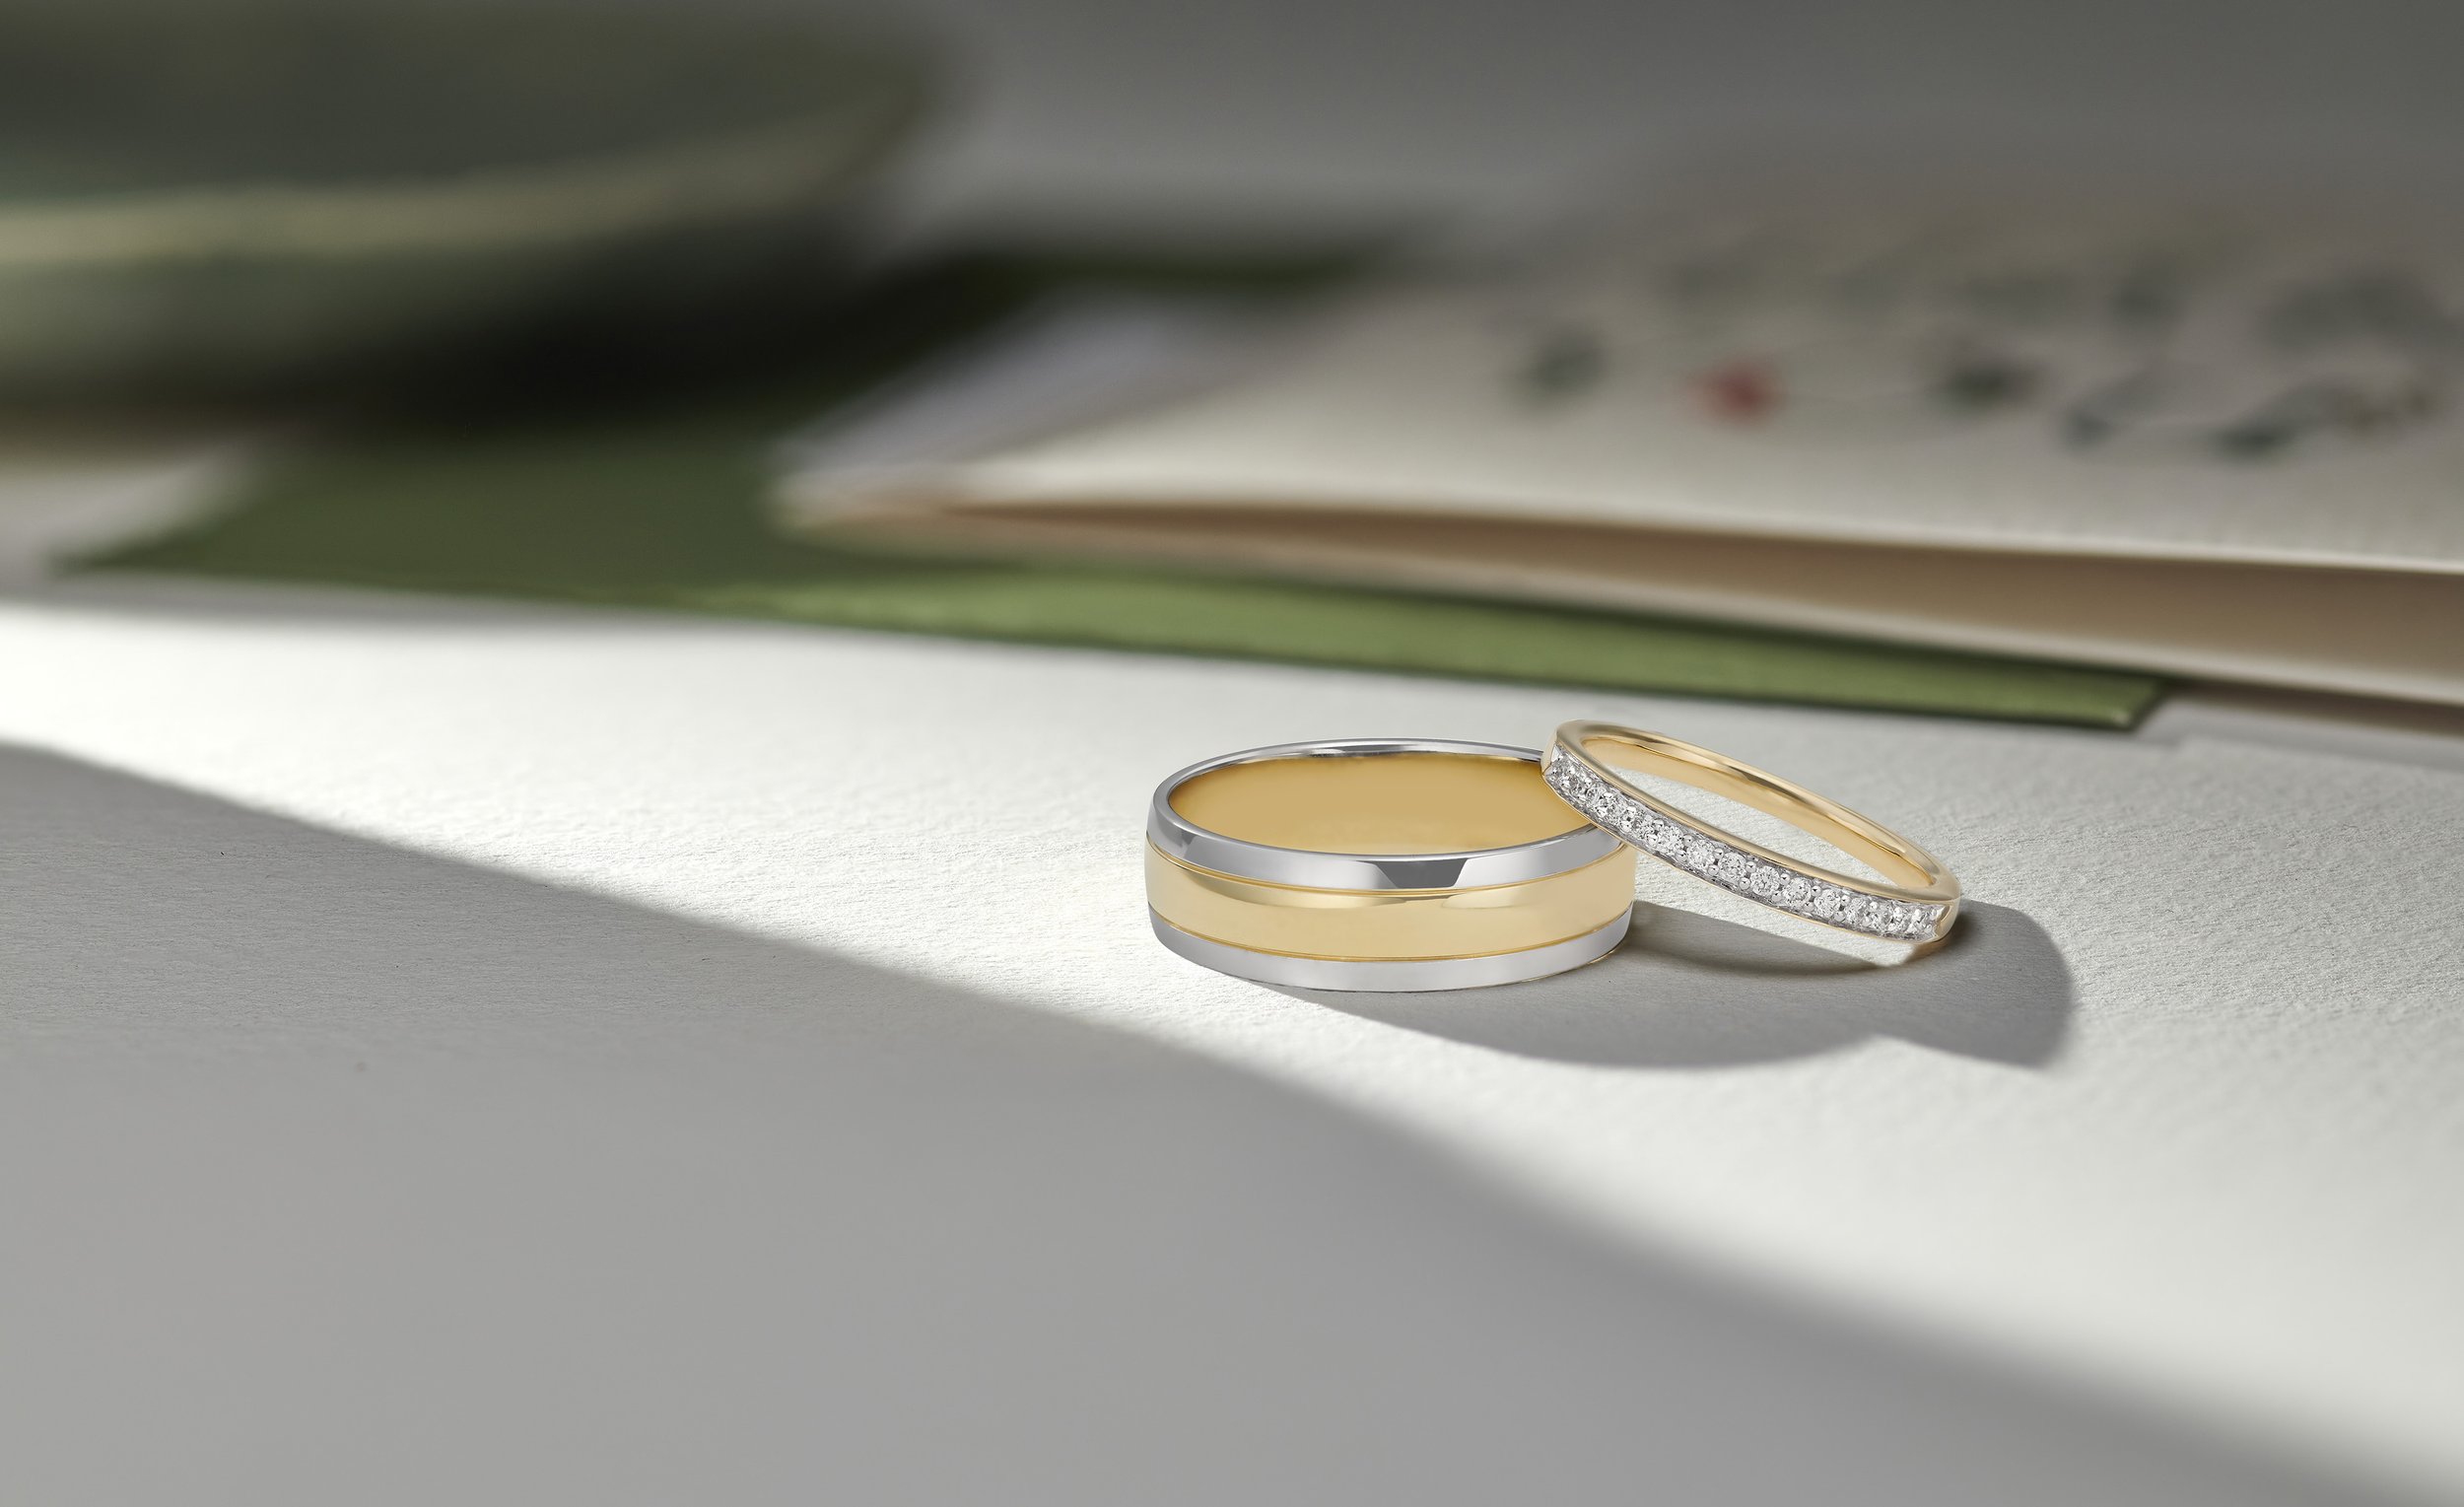 Stunning Anniversary Rings That Will Take Your Breath Away